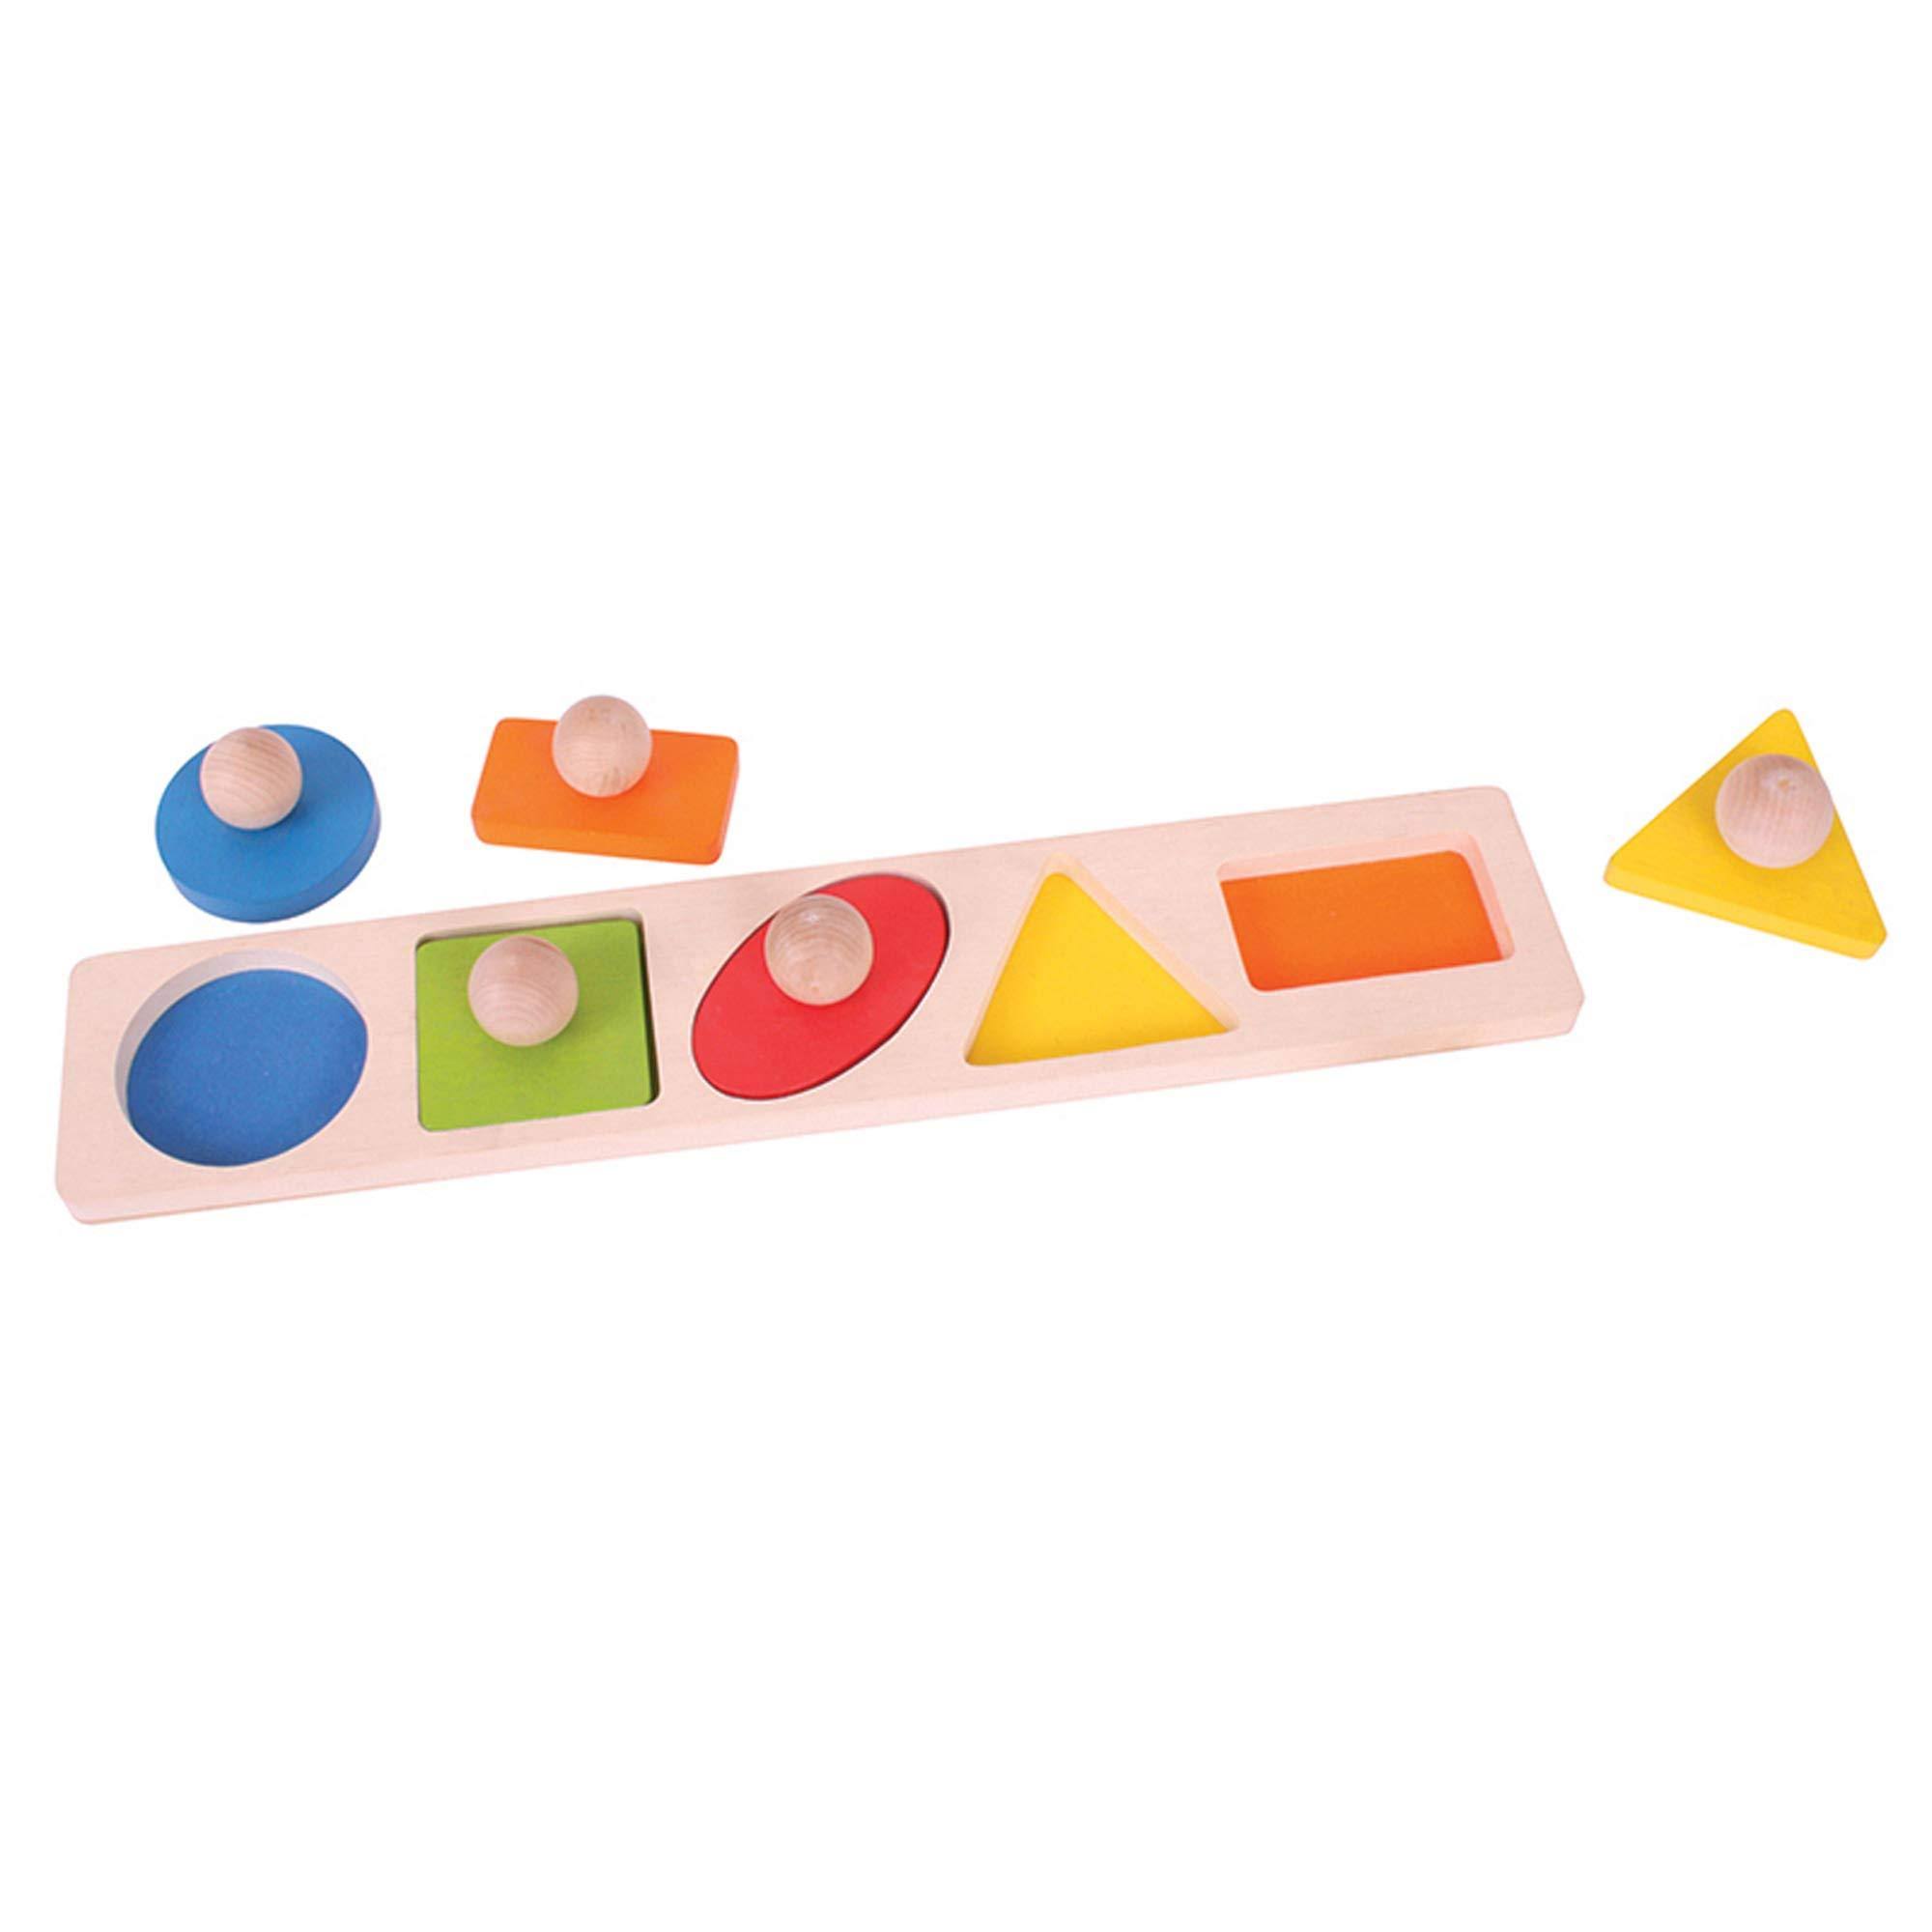 Bigjigs Toys Matching Wooden Board Puzzle Shape Toy